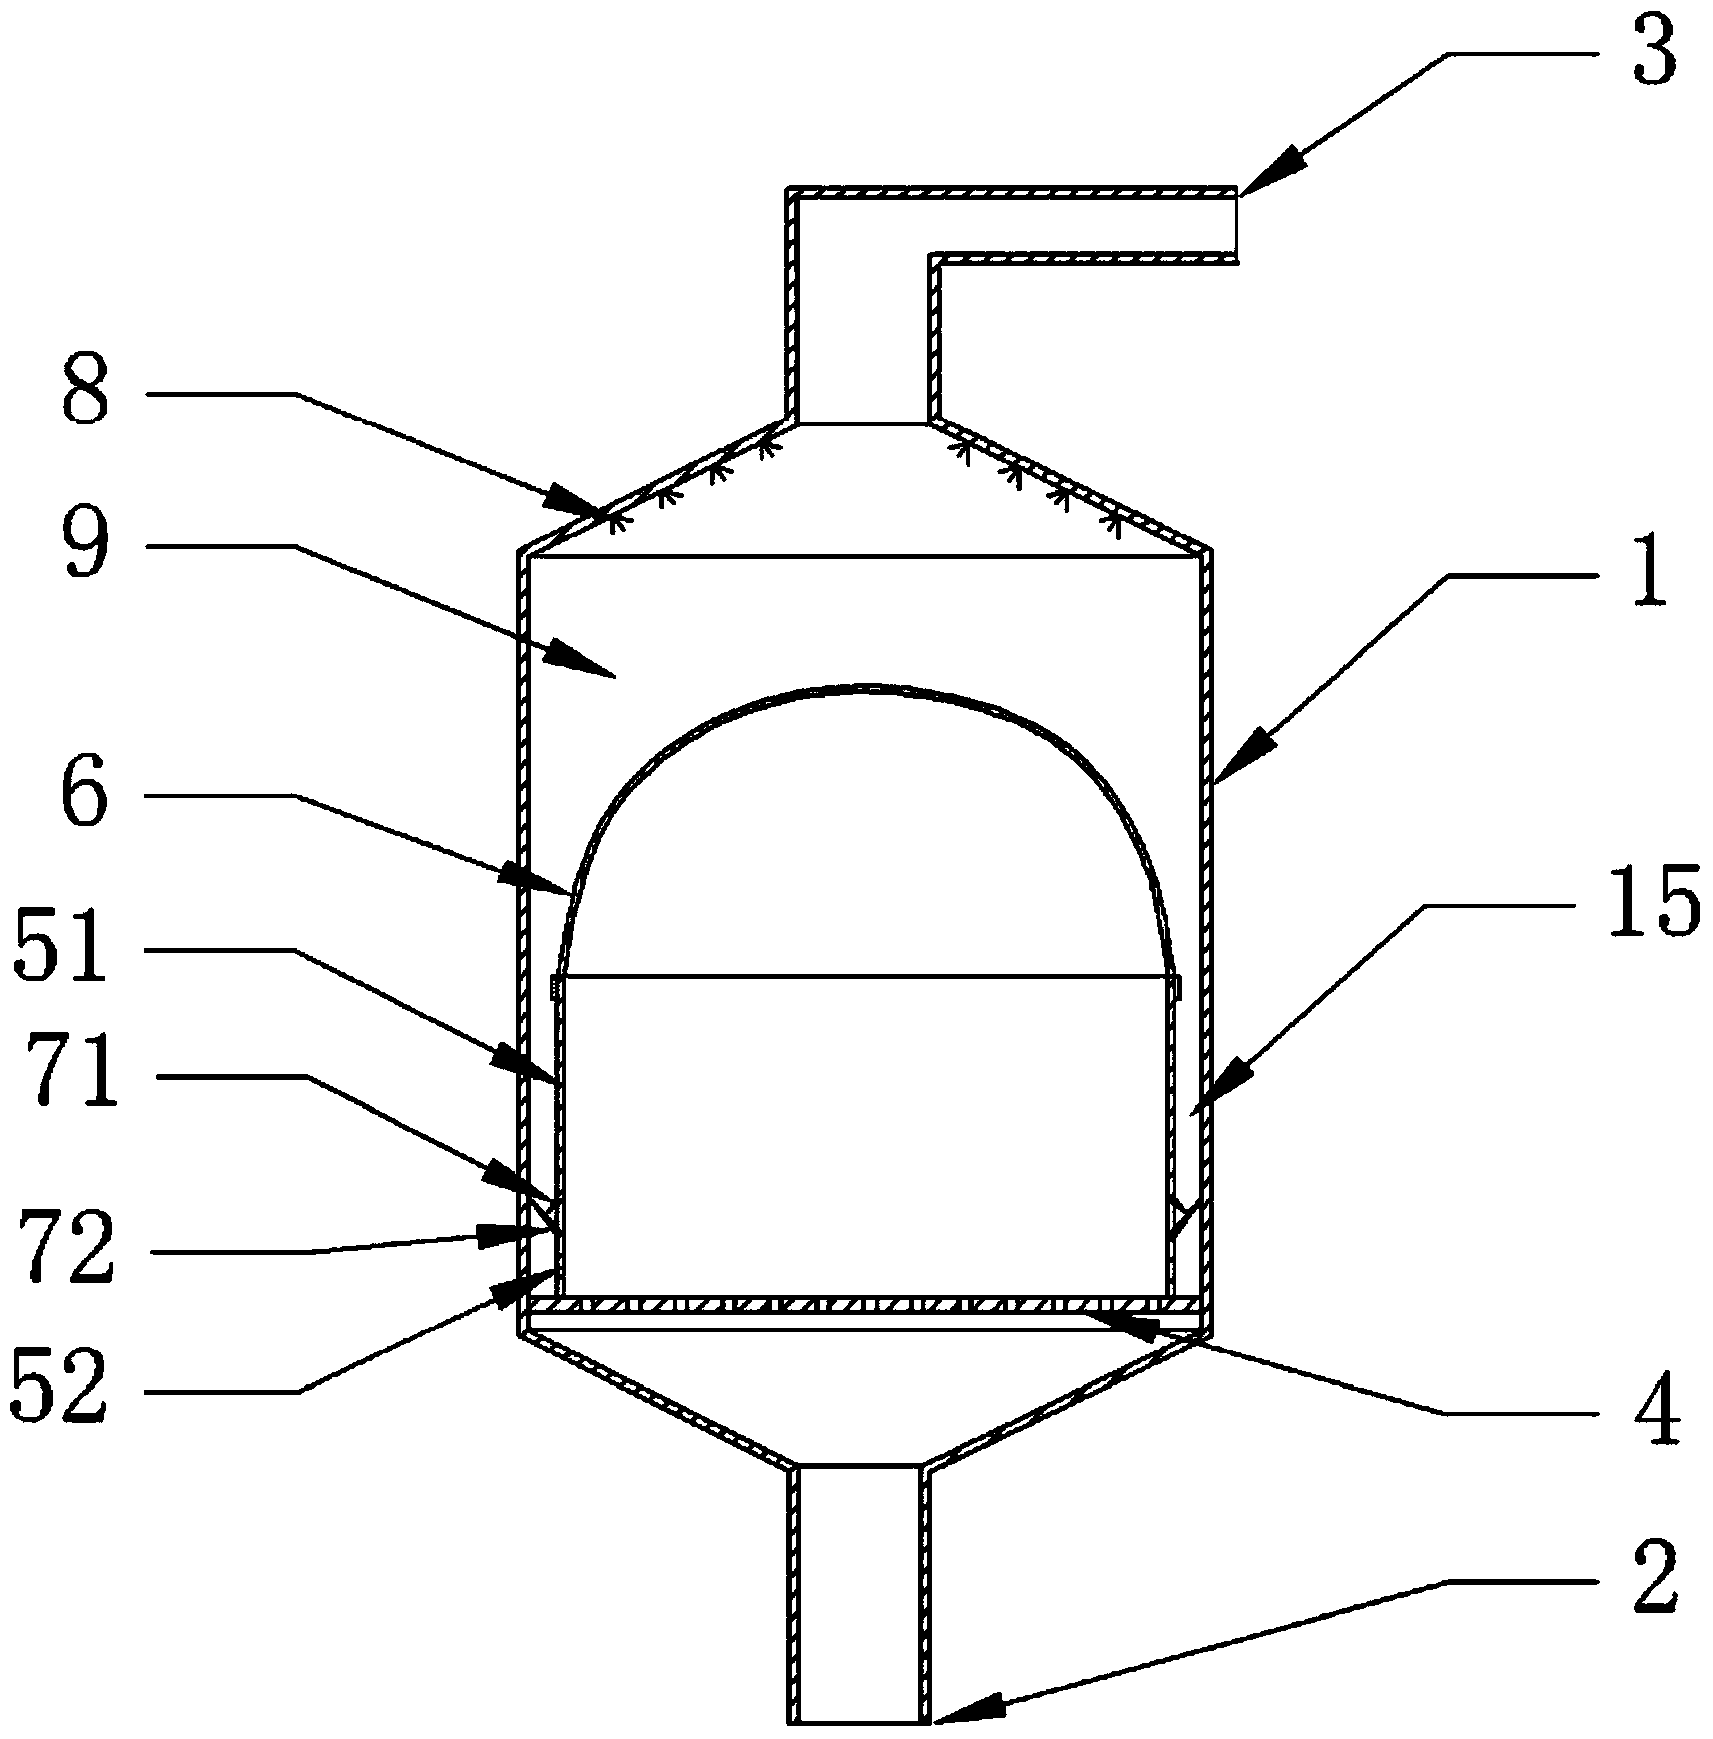 Catalytic reduction type de-nitrification reactor of circulating fluidized bed